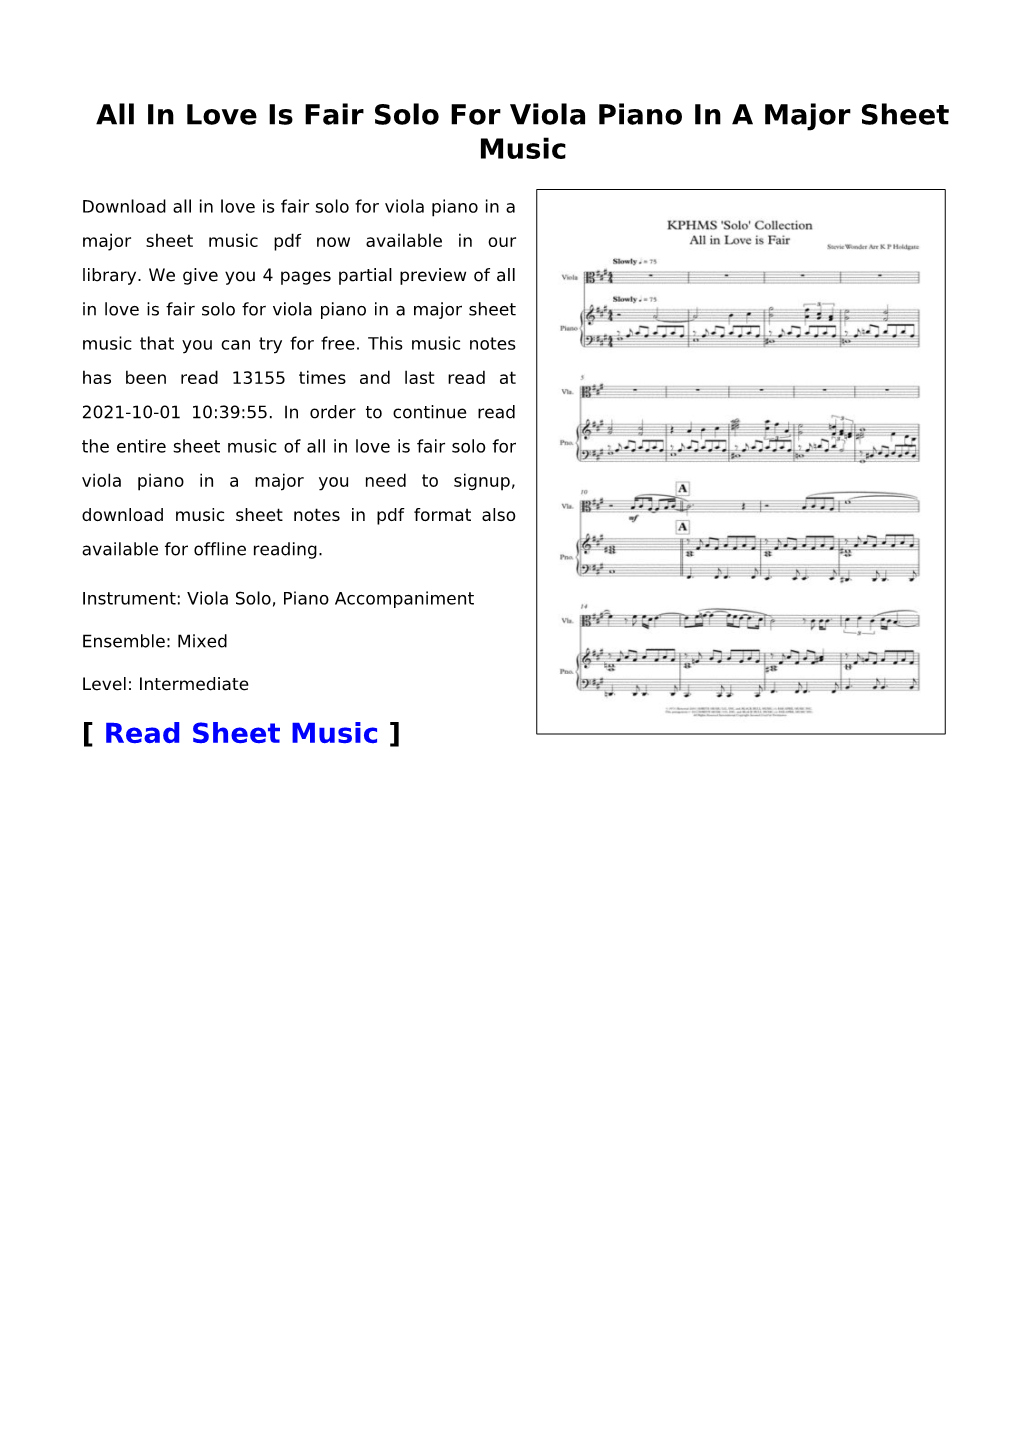 All in Love Is Fair Solo for Viola Piano in a Major Sheet Music